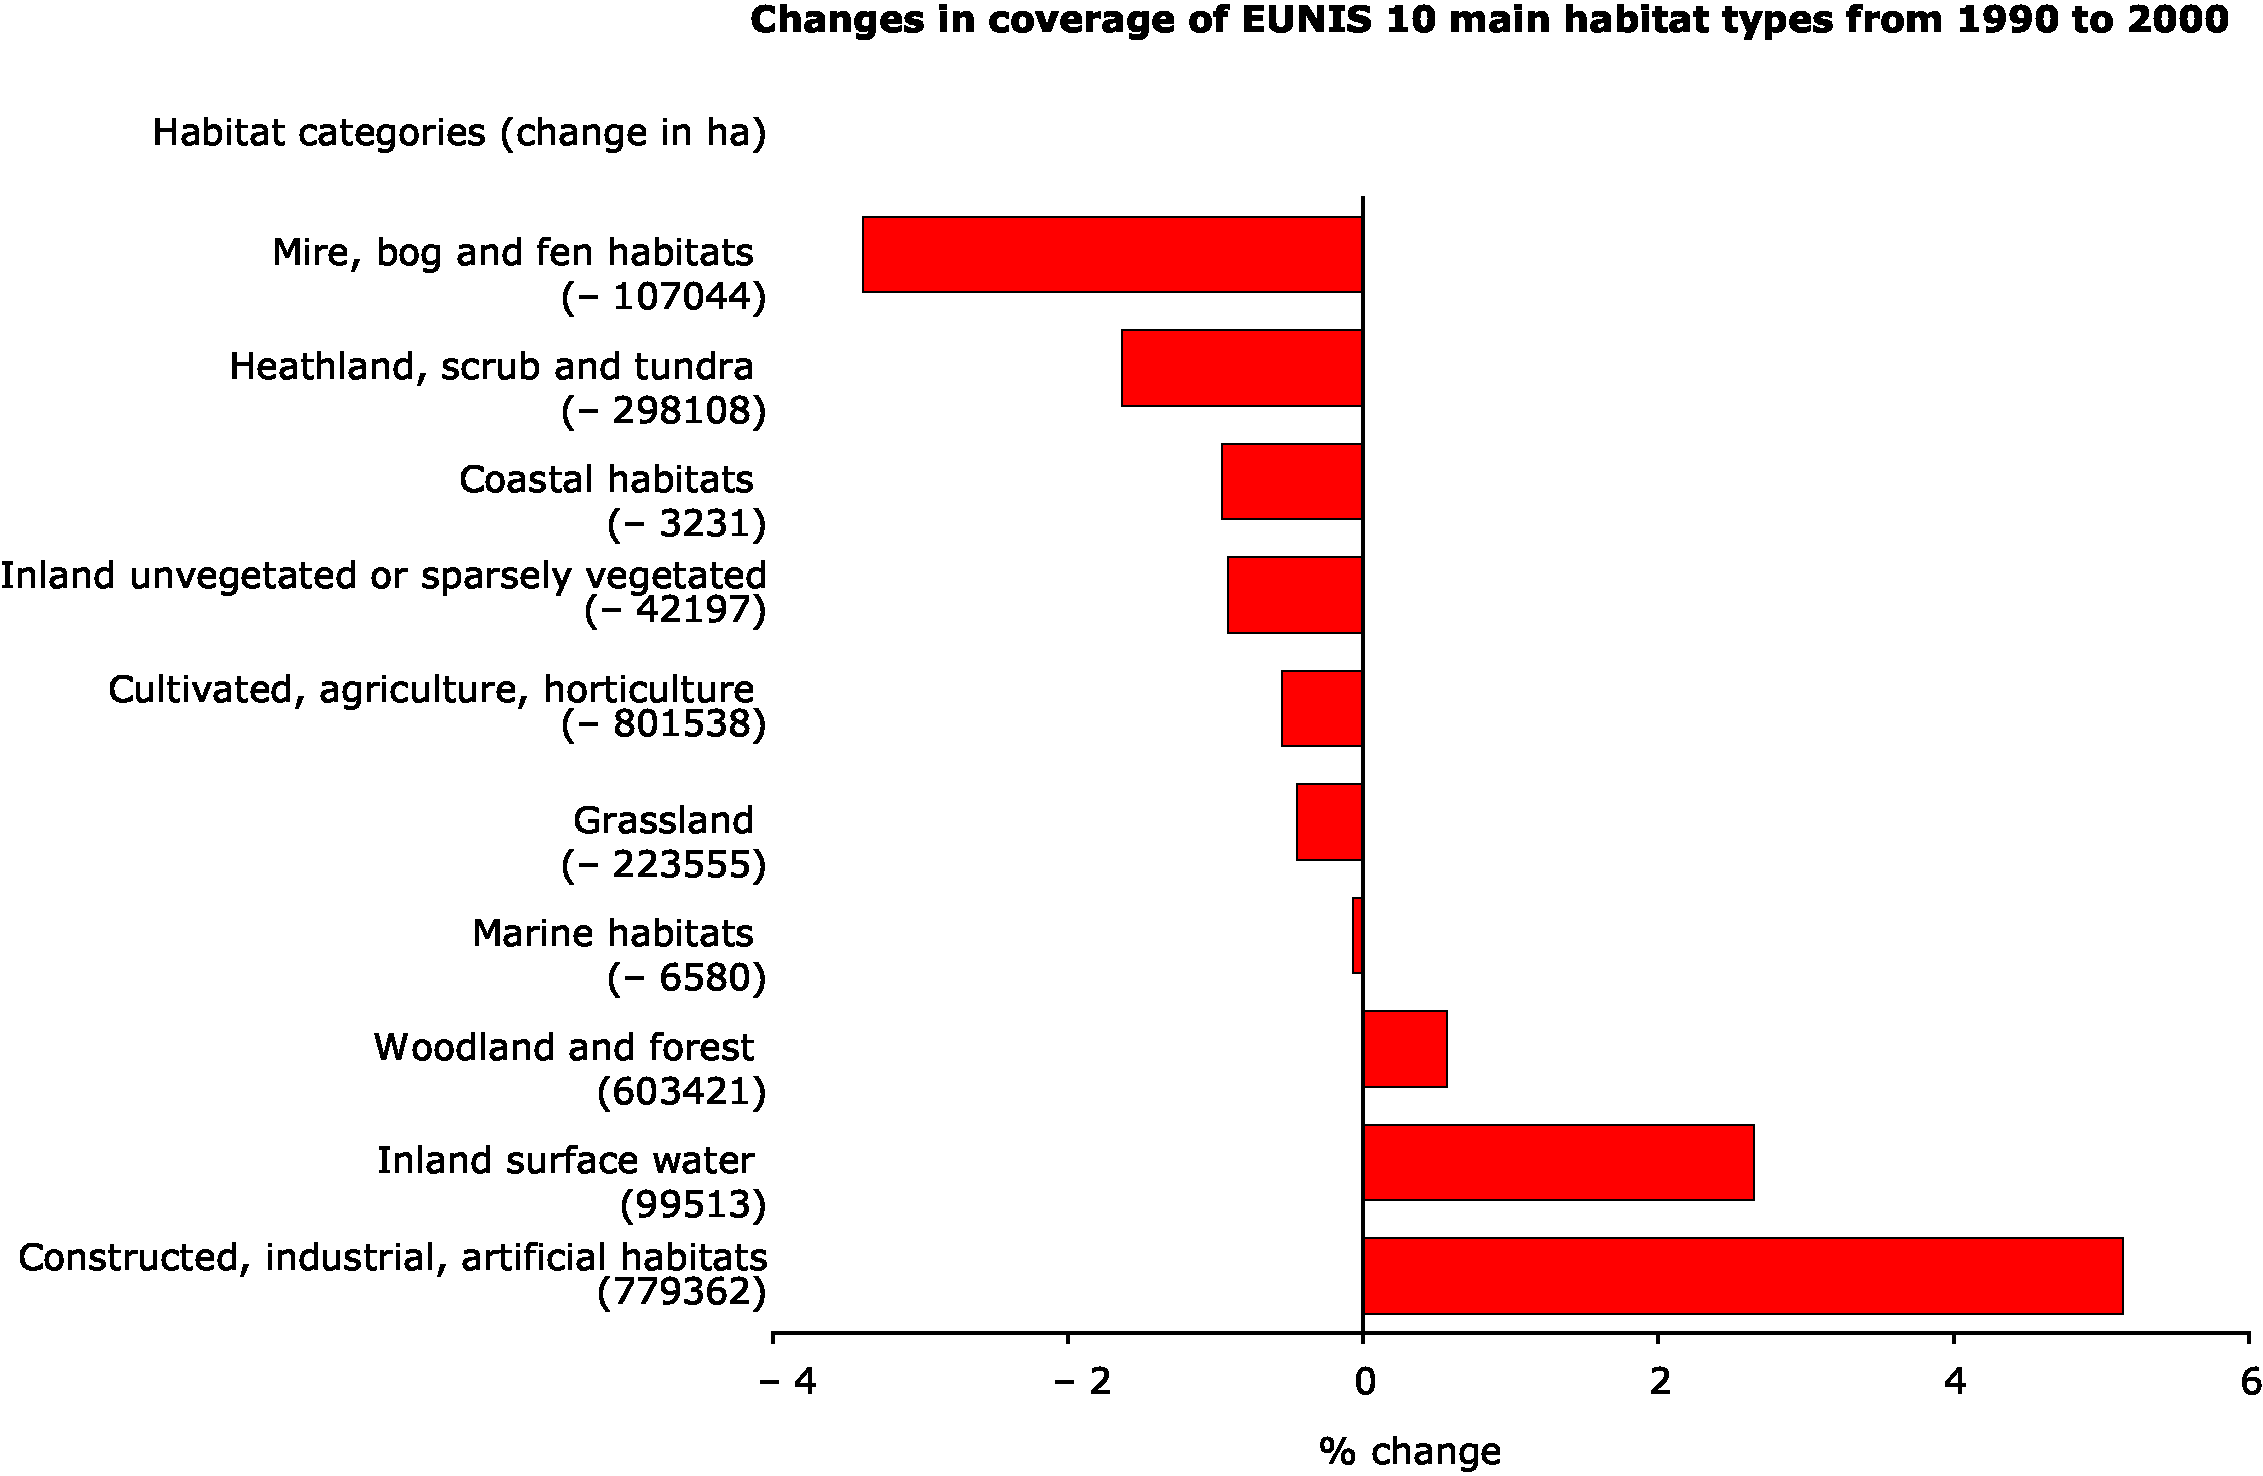 Land cover change from 1990 to 2000 expressed as % of the 1990 level, aggregated into EUNIS habitat level 1 categories